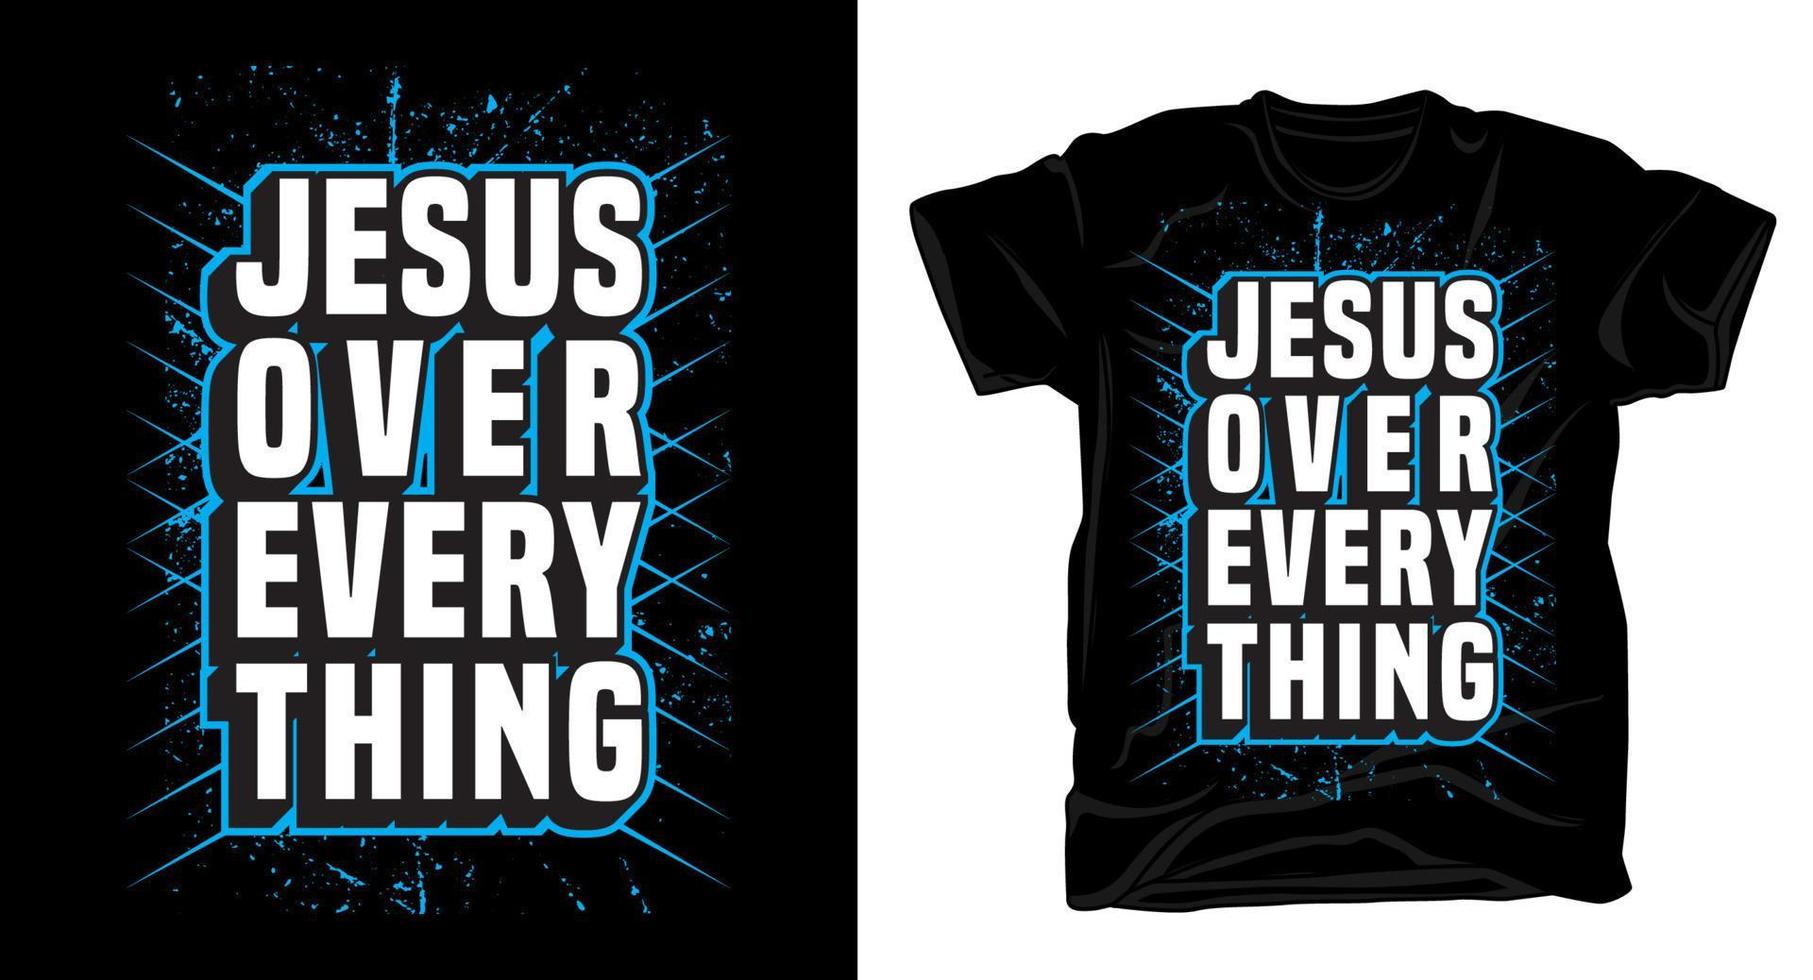 Jesus over every thing christian religious motivational typography t shirt design vector